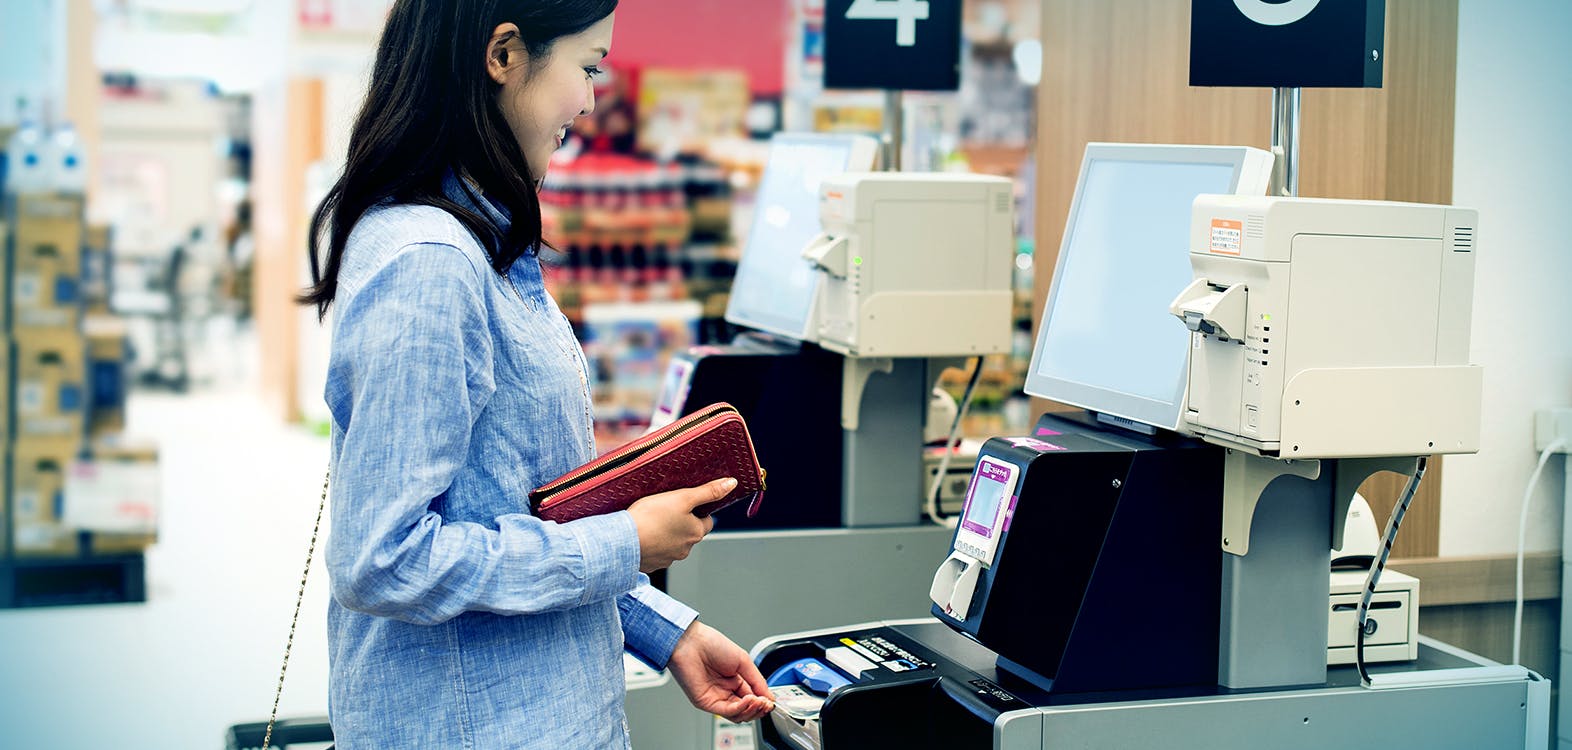 woman getting cash from a self checkout